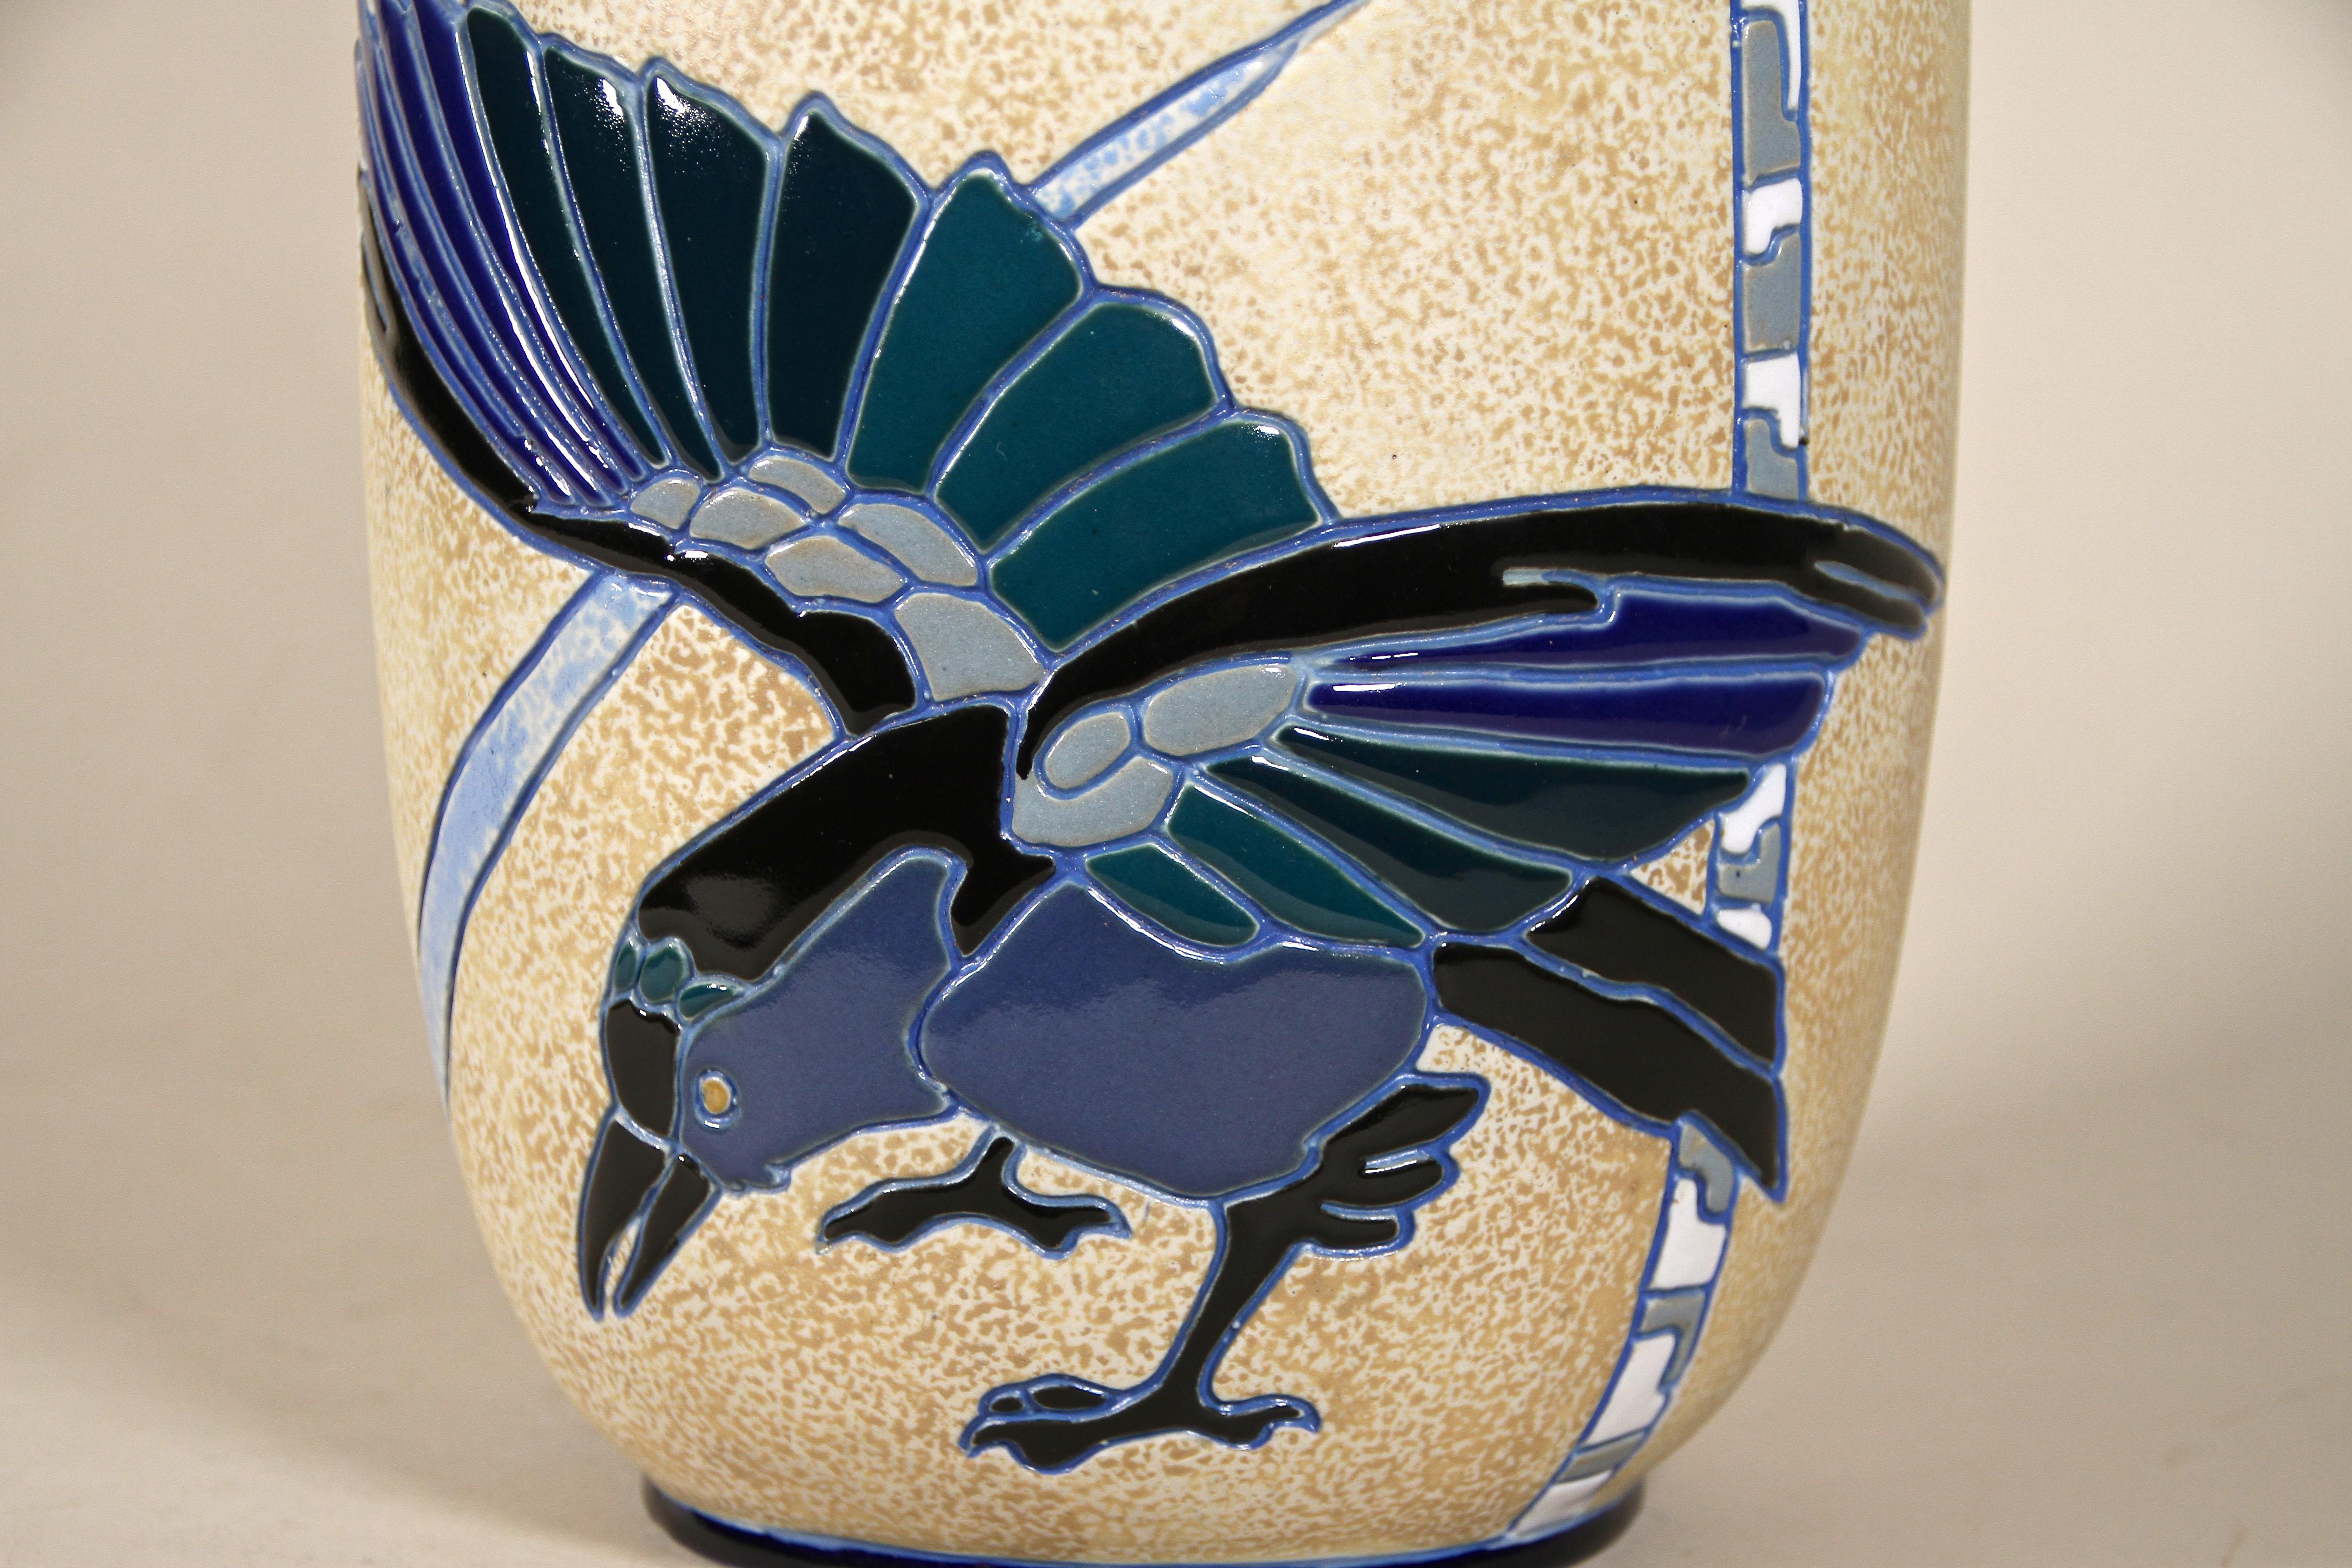 Unique Art Nouveau Majolica Vase by Amphora Czechoslovakia from the early Art Deco period around 1920. The beautiful shaped body shows a fantastic relief design with unusual polychrome enameled raven. A main eyecatcher are definitely the three